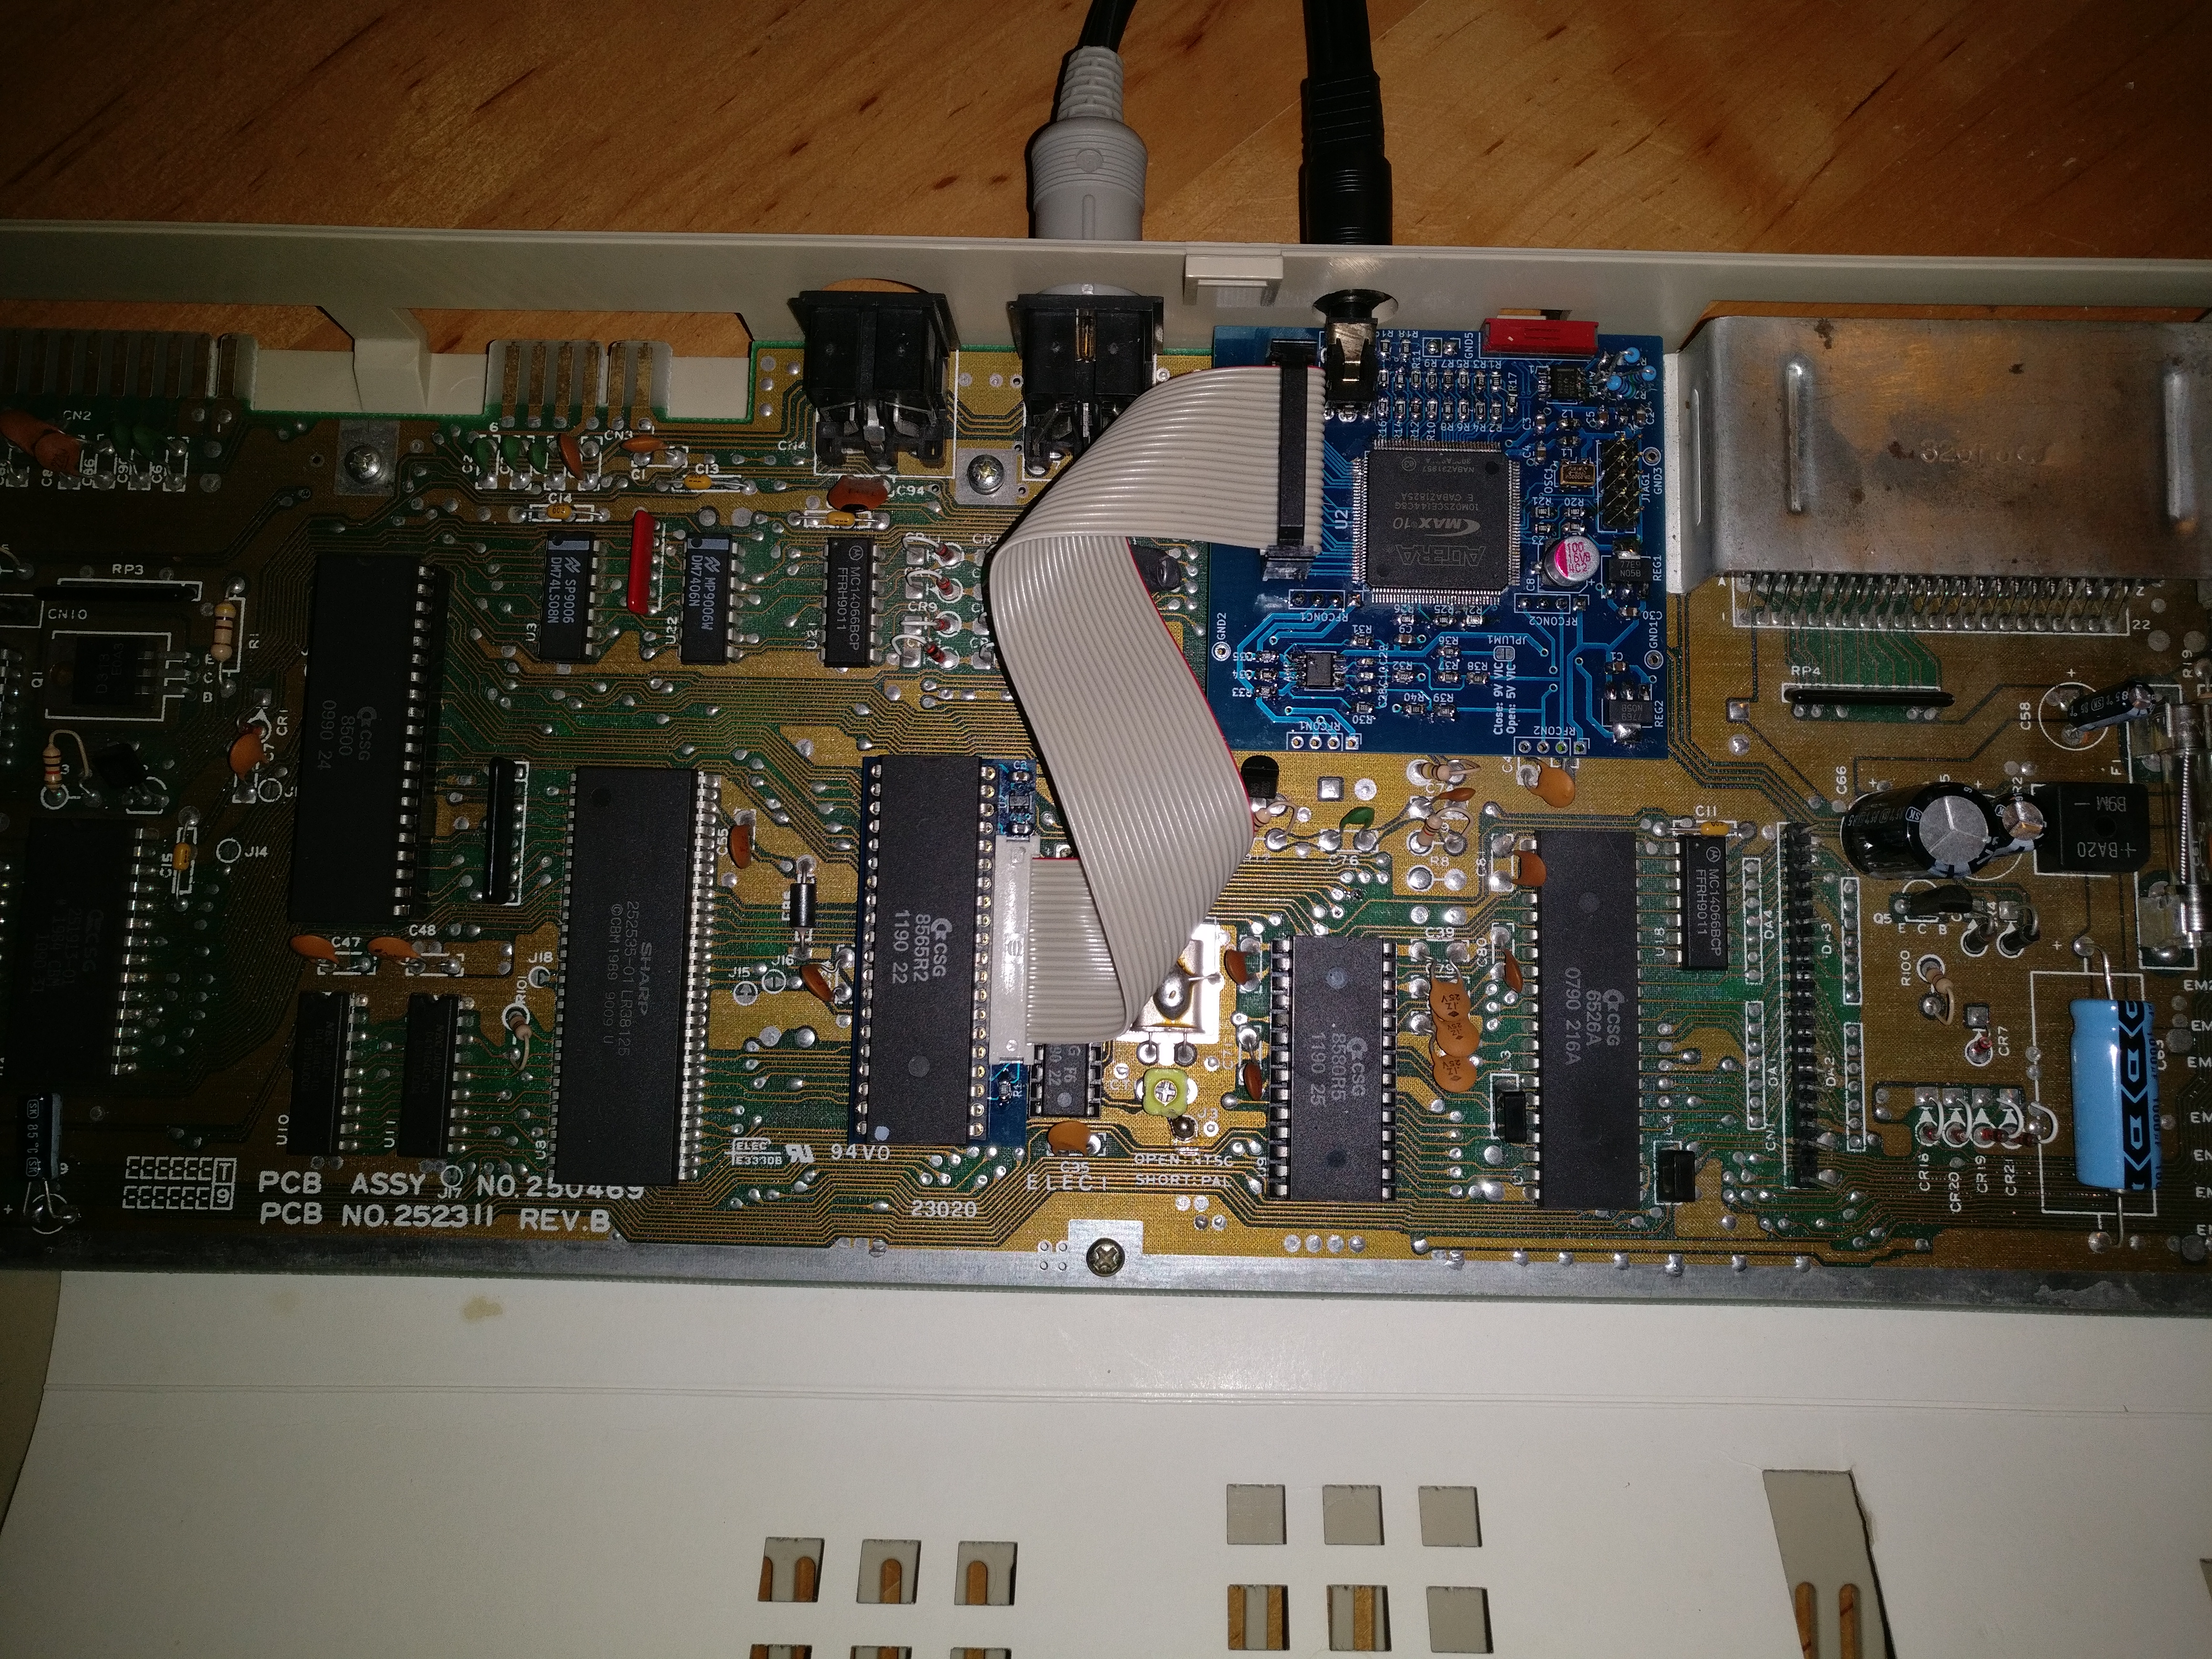 Component Video Enhancement for Commodore 64